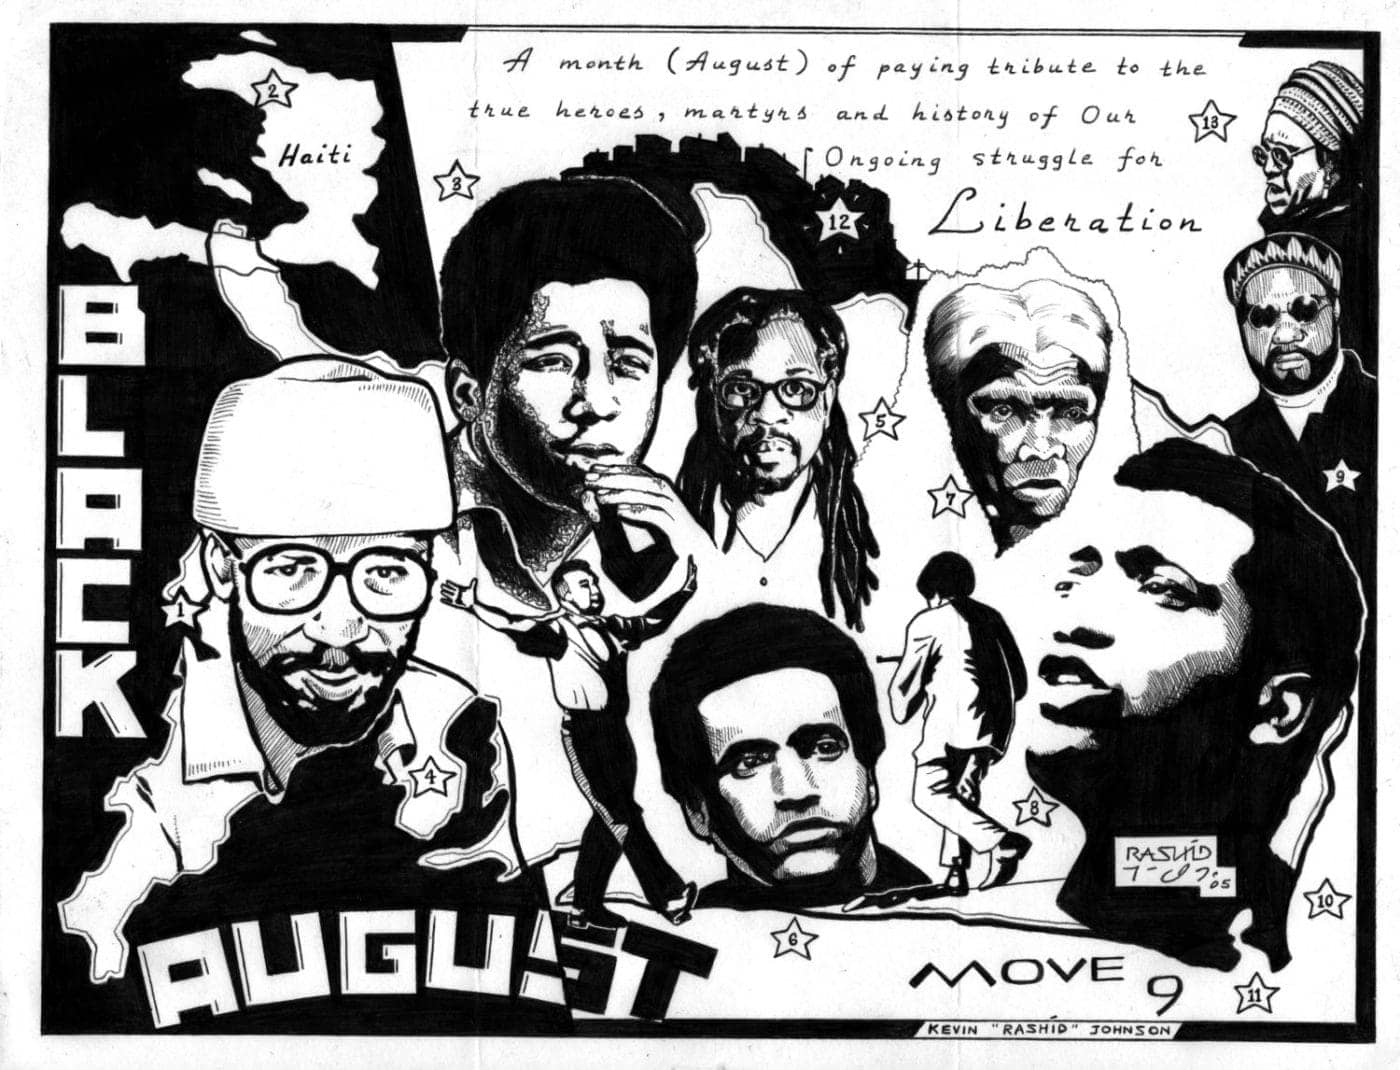 Black-August-art-by-Kevin-Rashid-Johnson-2005-1400x1070, The birth, meaning and practice of Black August, Abolition Now! 